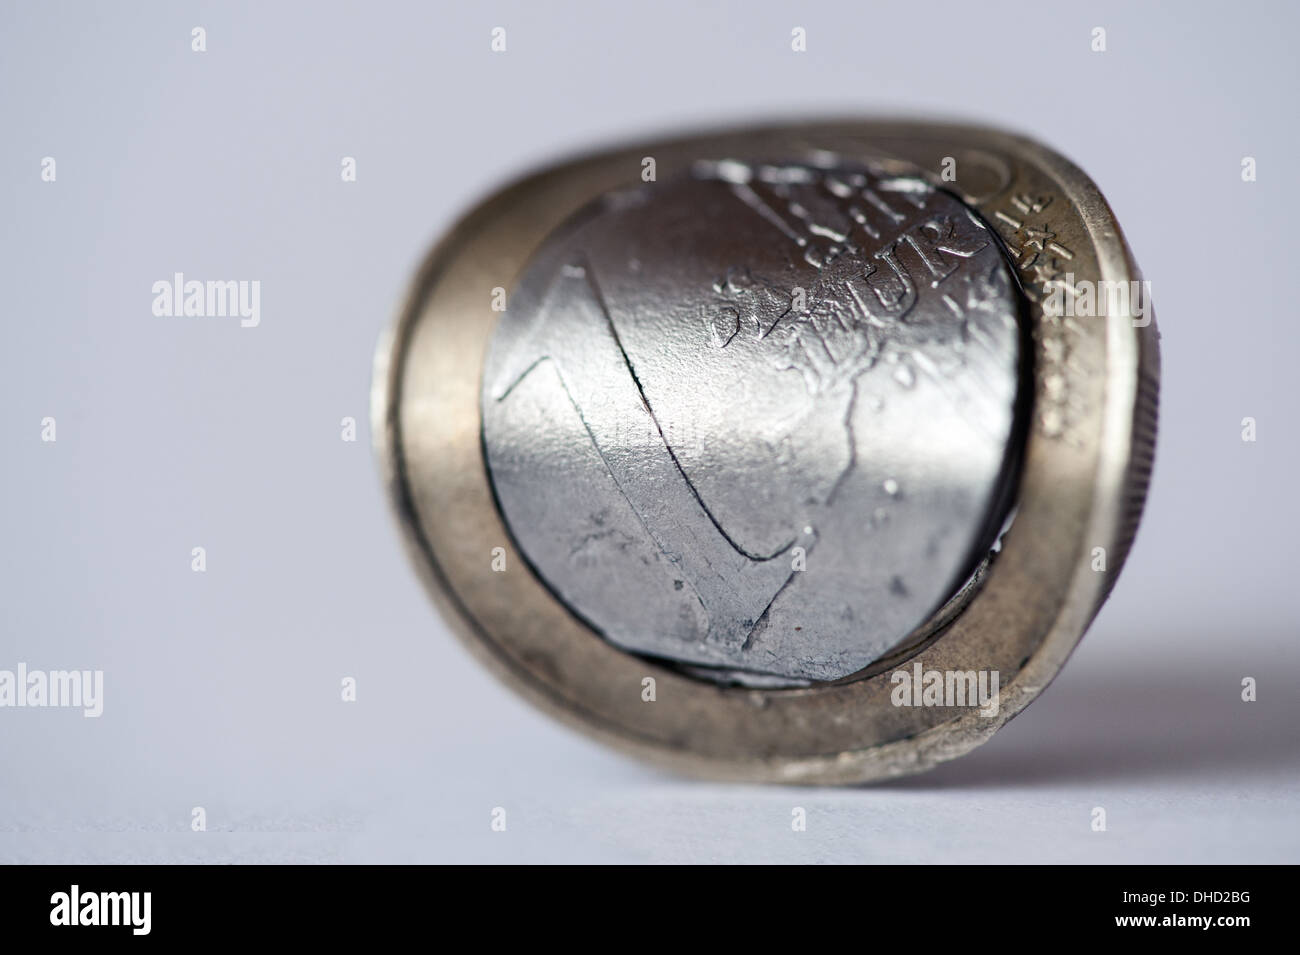 Euro coin with convex curvature Stock Photo